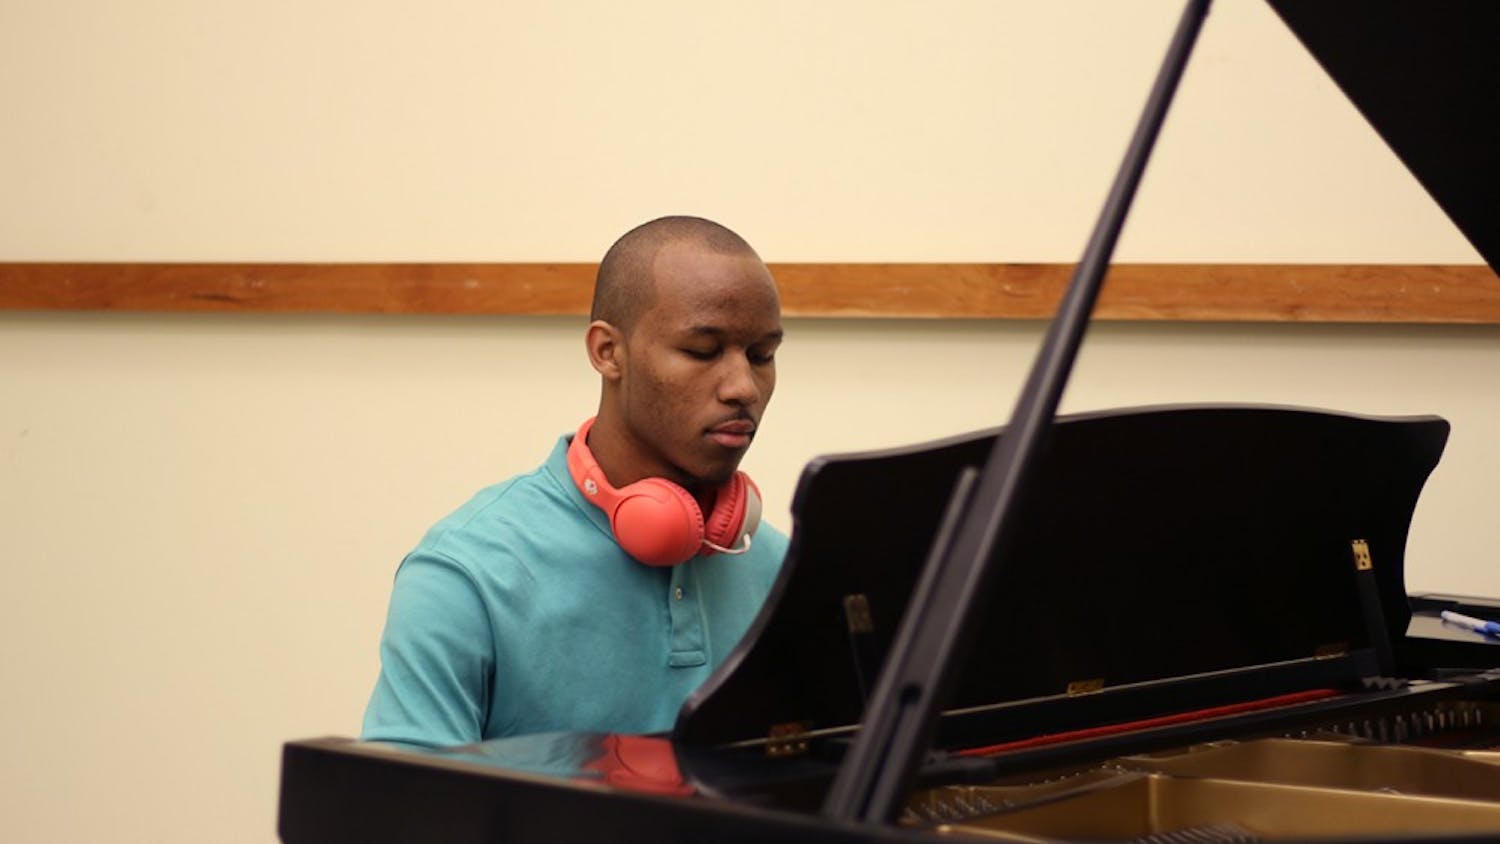 Chase Carroll, a sophomore music major, is releasing his album "The Perfect Problem" on Mar 26. Carroll collaborated with 11 UNC students to produce it and is featured on piano on 8 of the tracks.